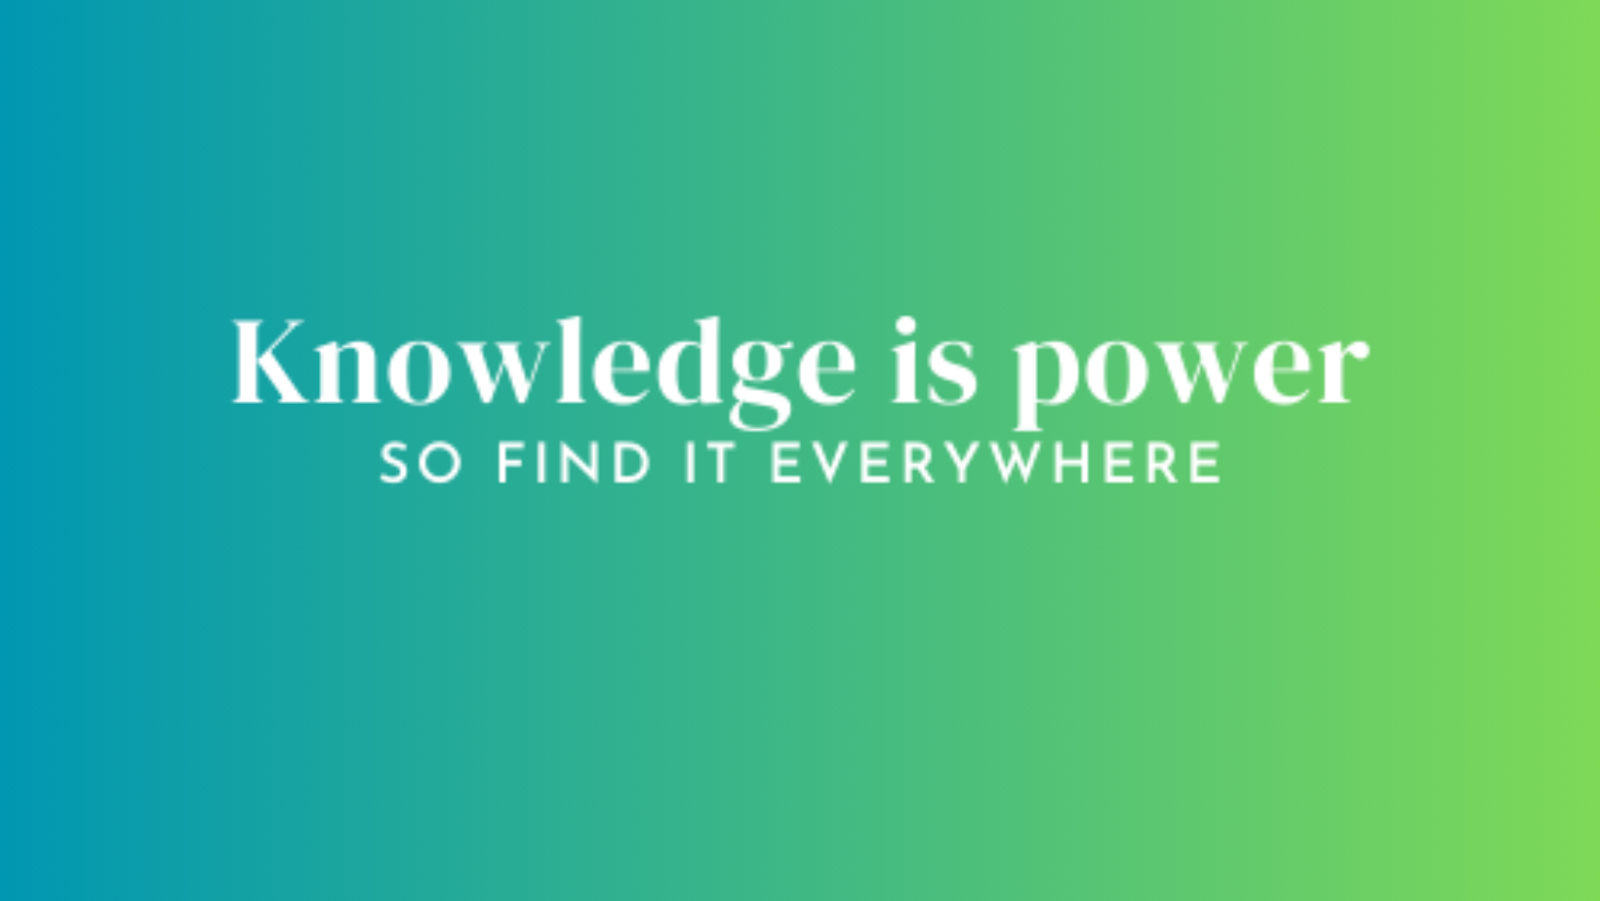 Knowledge is power, so find it everywhere.